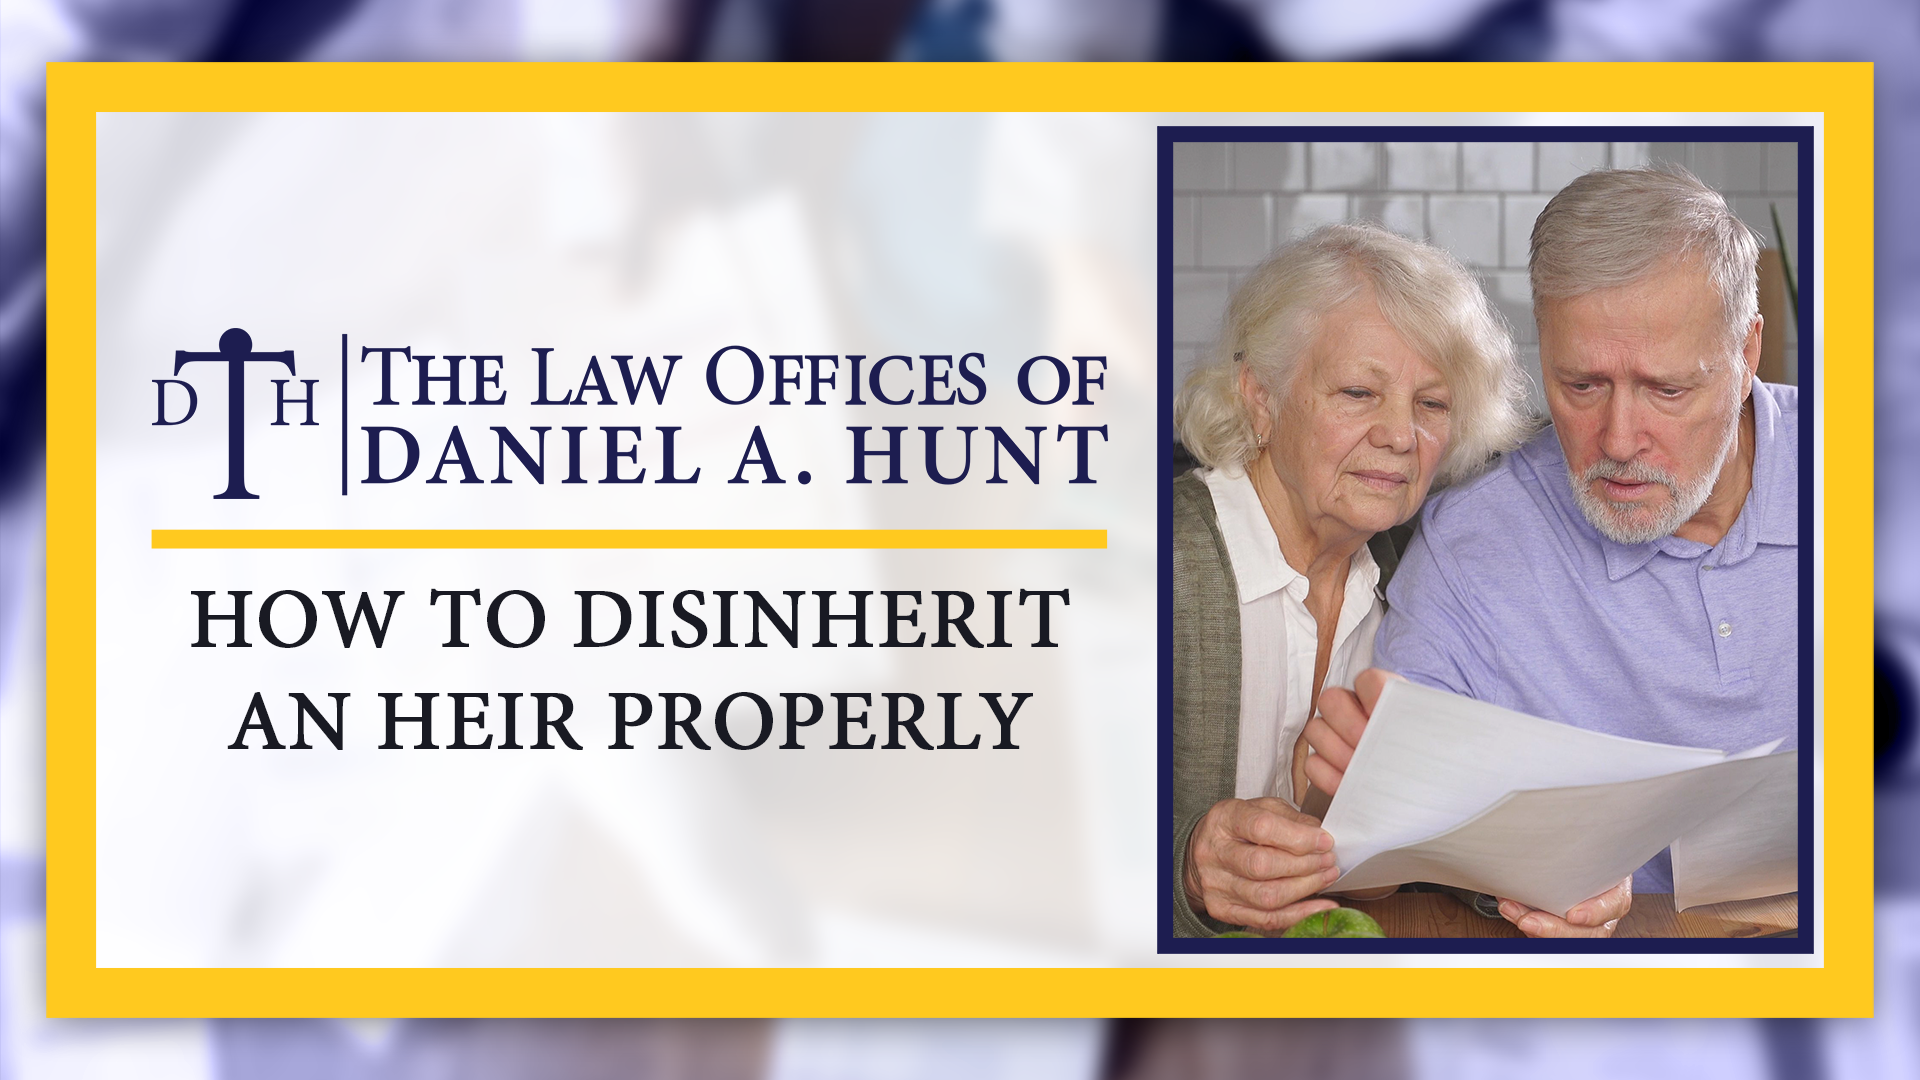 How to Disinherit an Heir Properly (2)